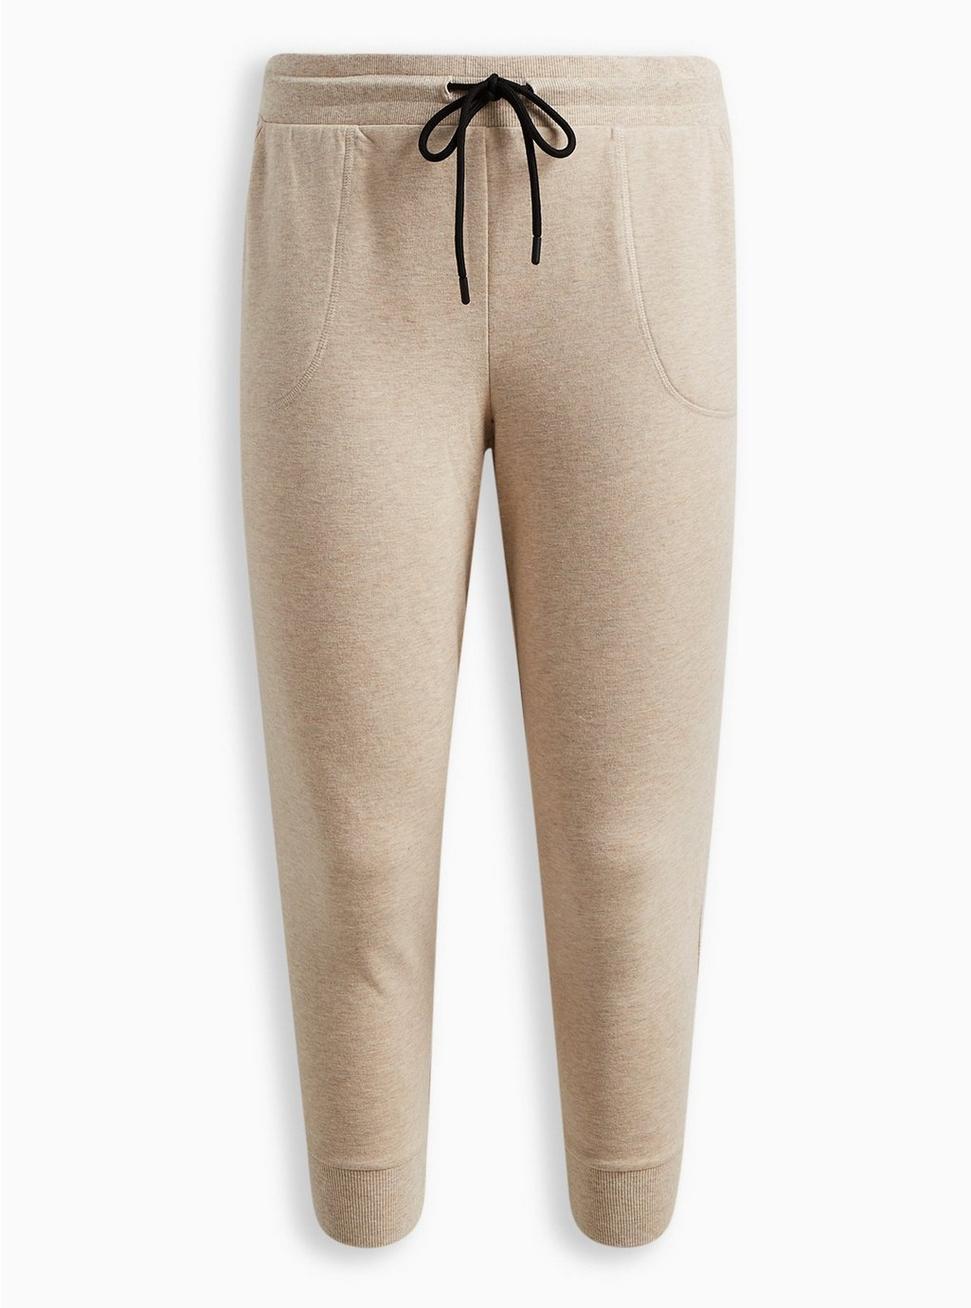 Plus Size Everyday Fleece Crop Active Jogger In Classic Fit, OATMEAL, hi-res